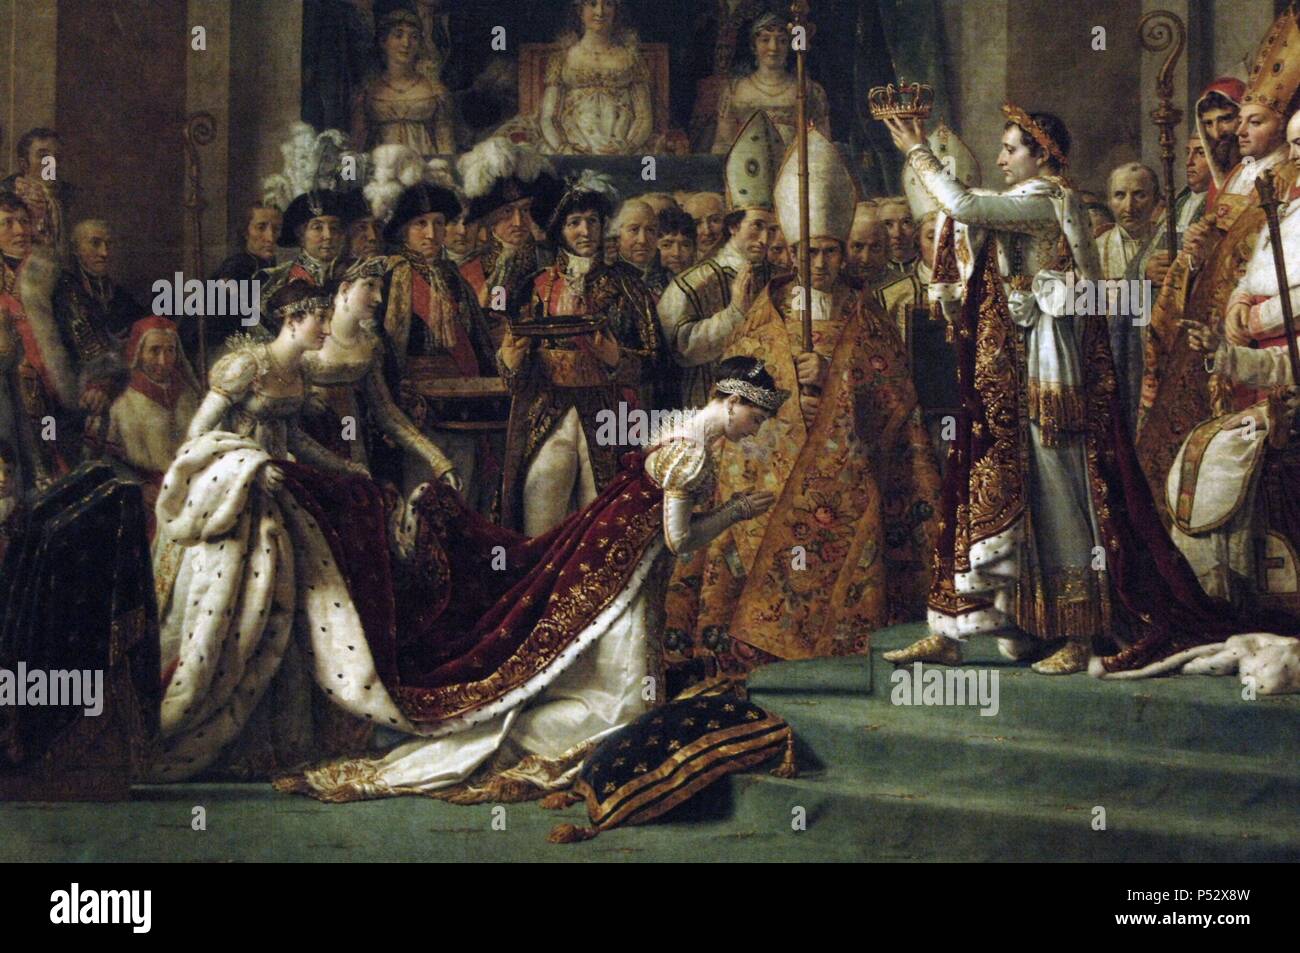 The Consecration of the Emperor Napolen and the Coronation of Empress Josephine on December 2, 1804, by  French painter Jacques Louis David (1748-1825). Museum of Louvre. Paris. France. Stock Photo